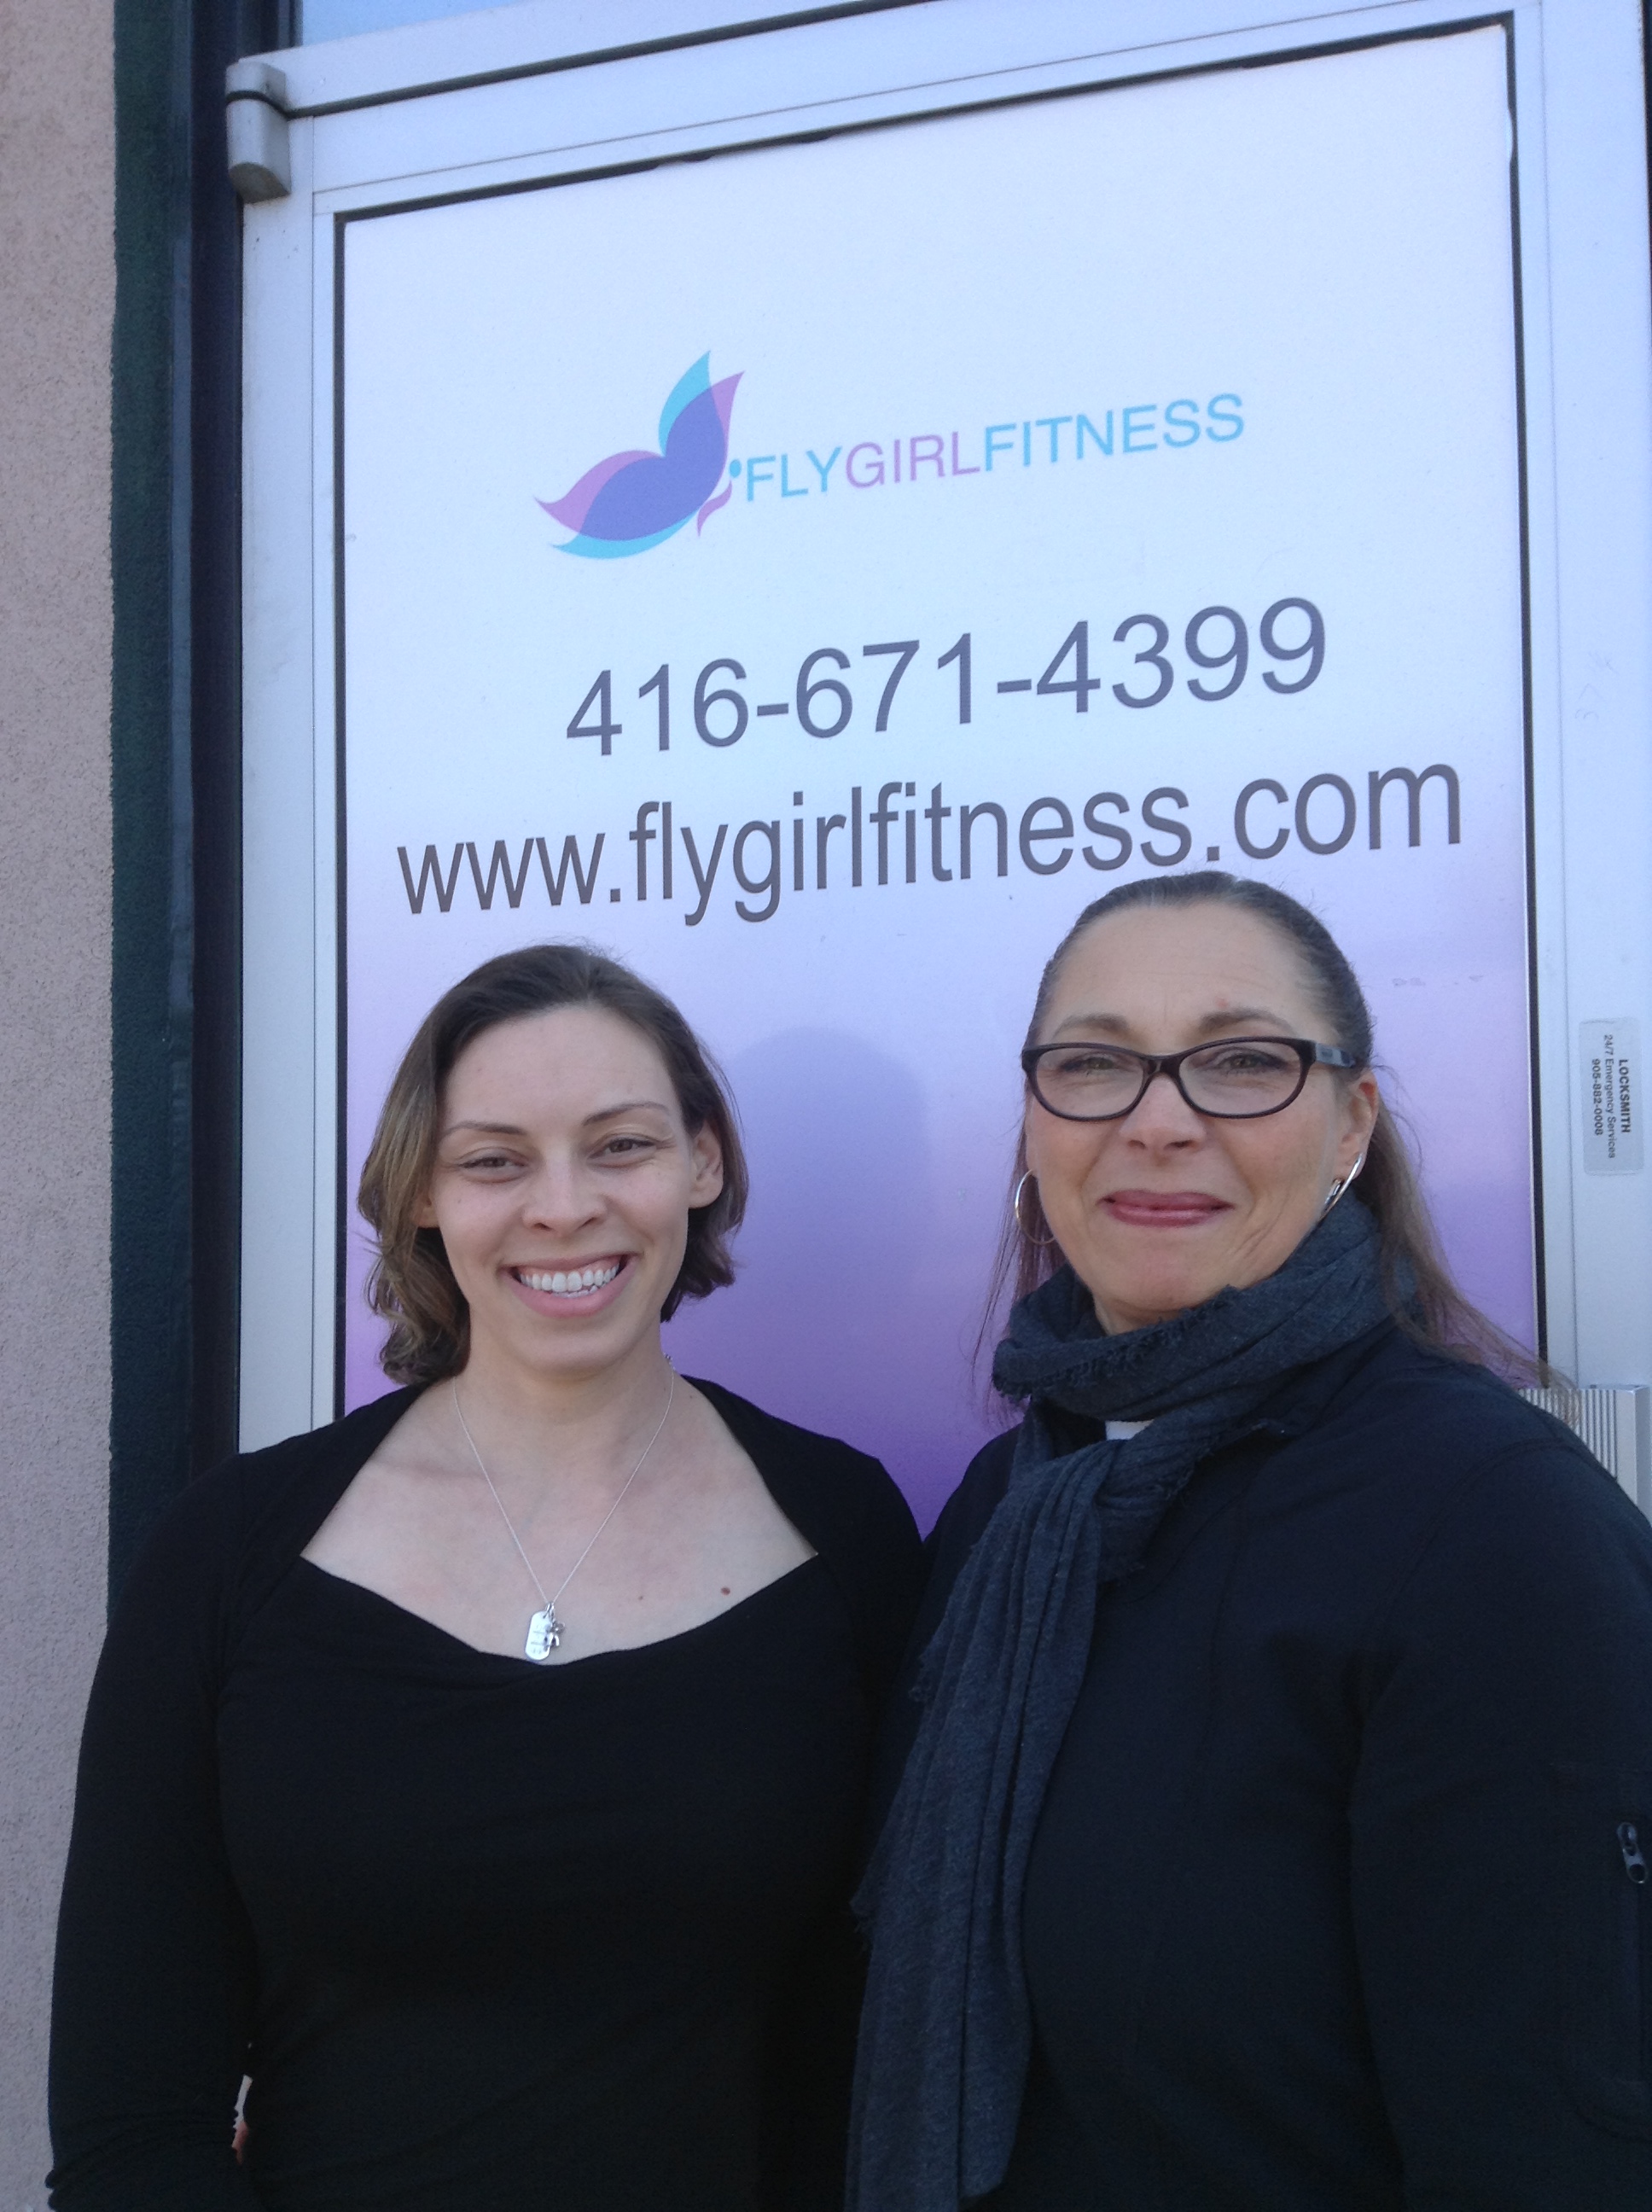 Jane Davis-Munro (right) with her daughter Briar Munro. Jane owns Pegasus Studios in DECA territory and Briar owns Fly Girl Fitness, on Cedarvale and Danforth. 